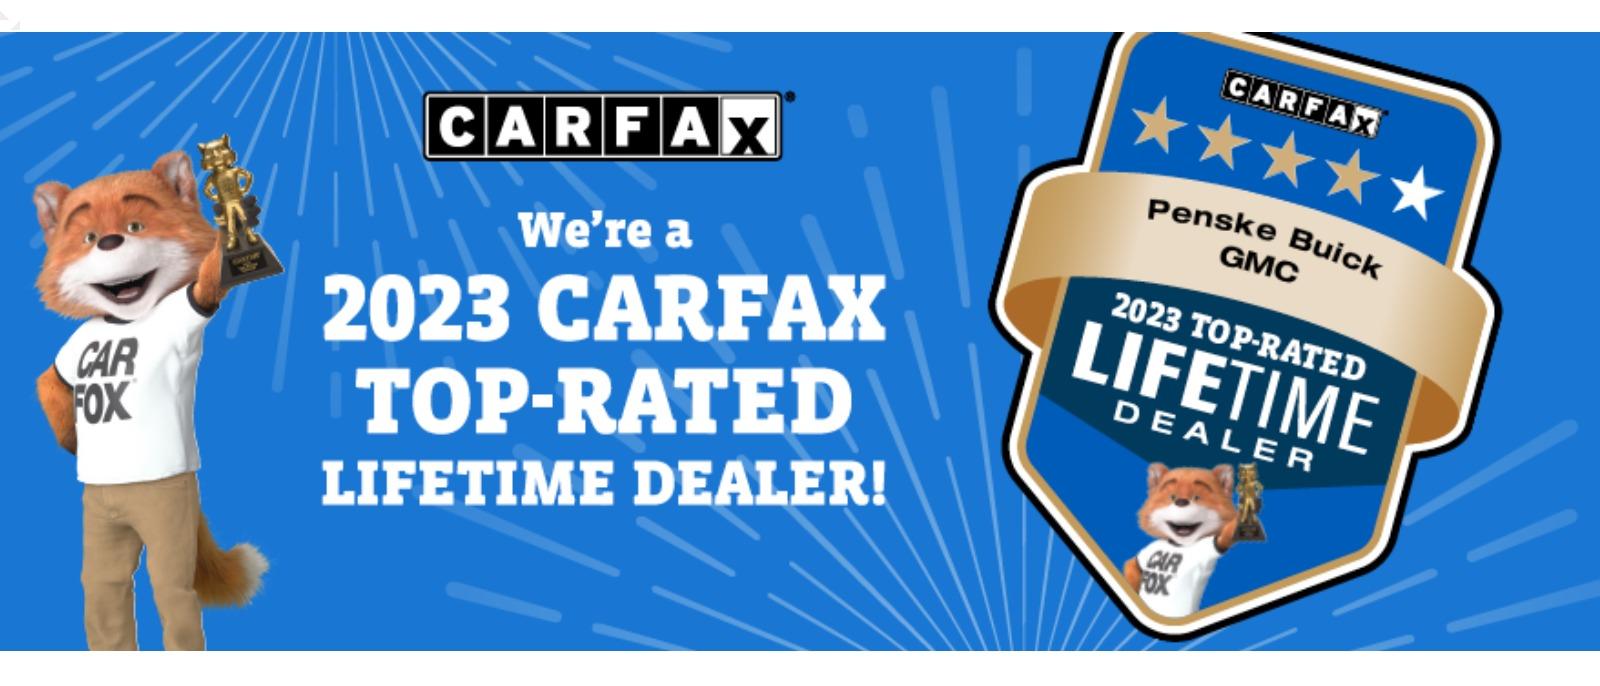 We're a 2023 CARFAX TOP-RATED LIFETIME DEALER!